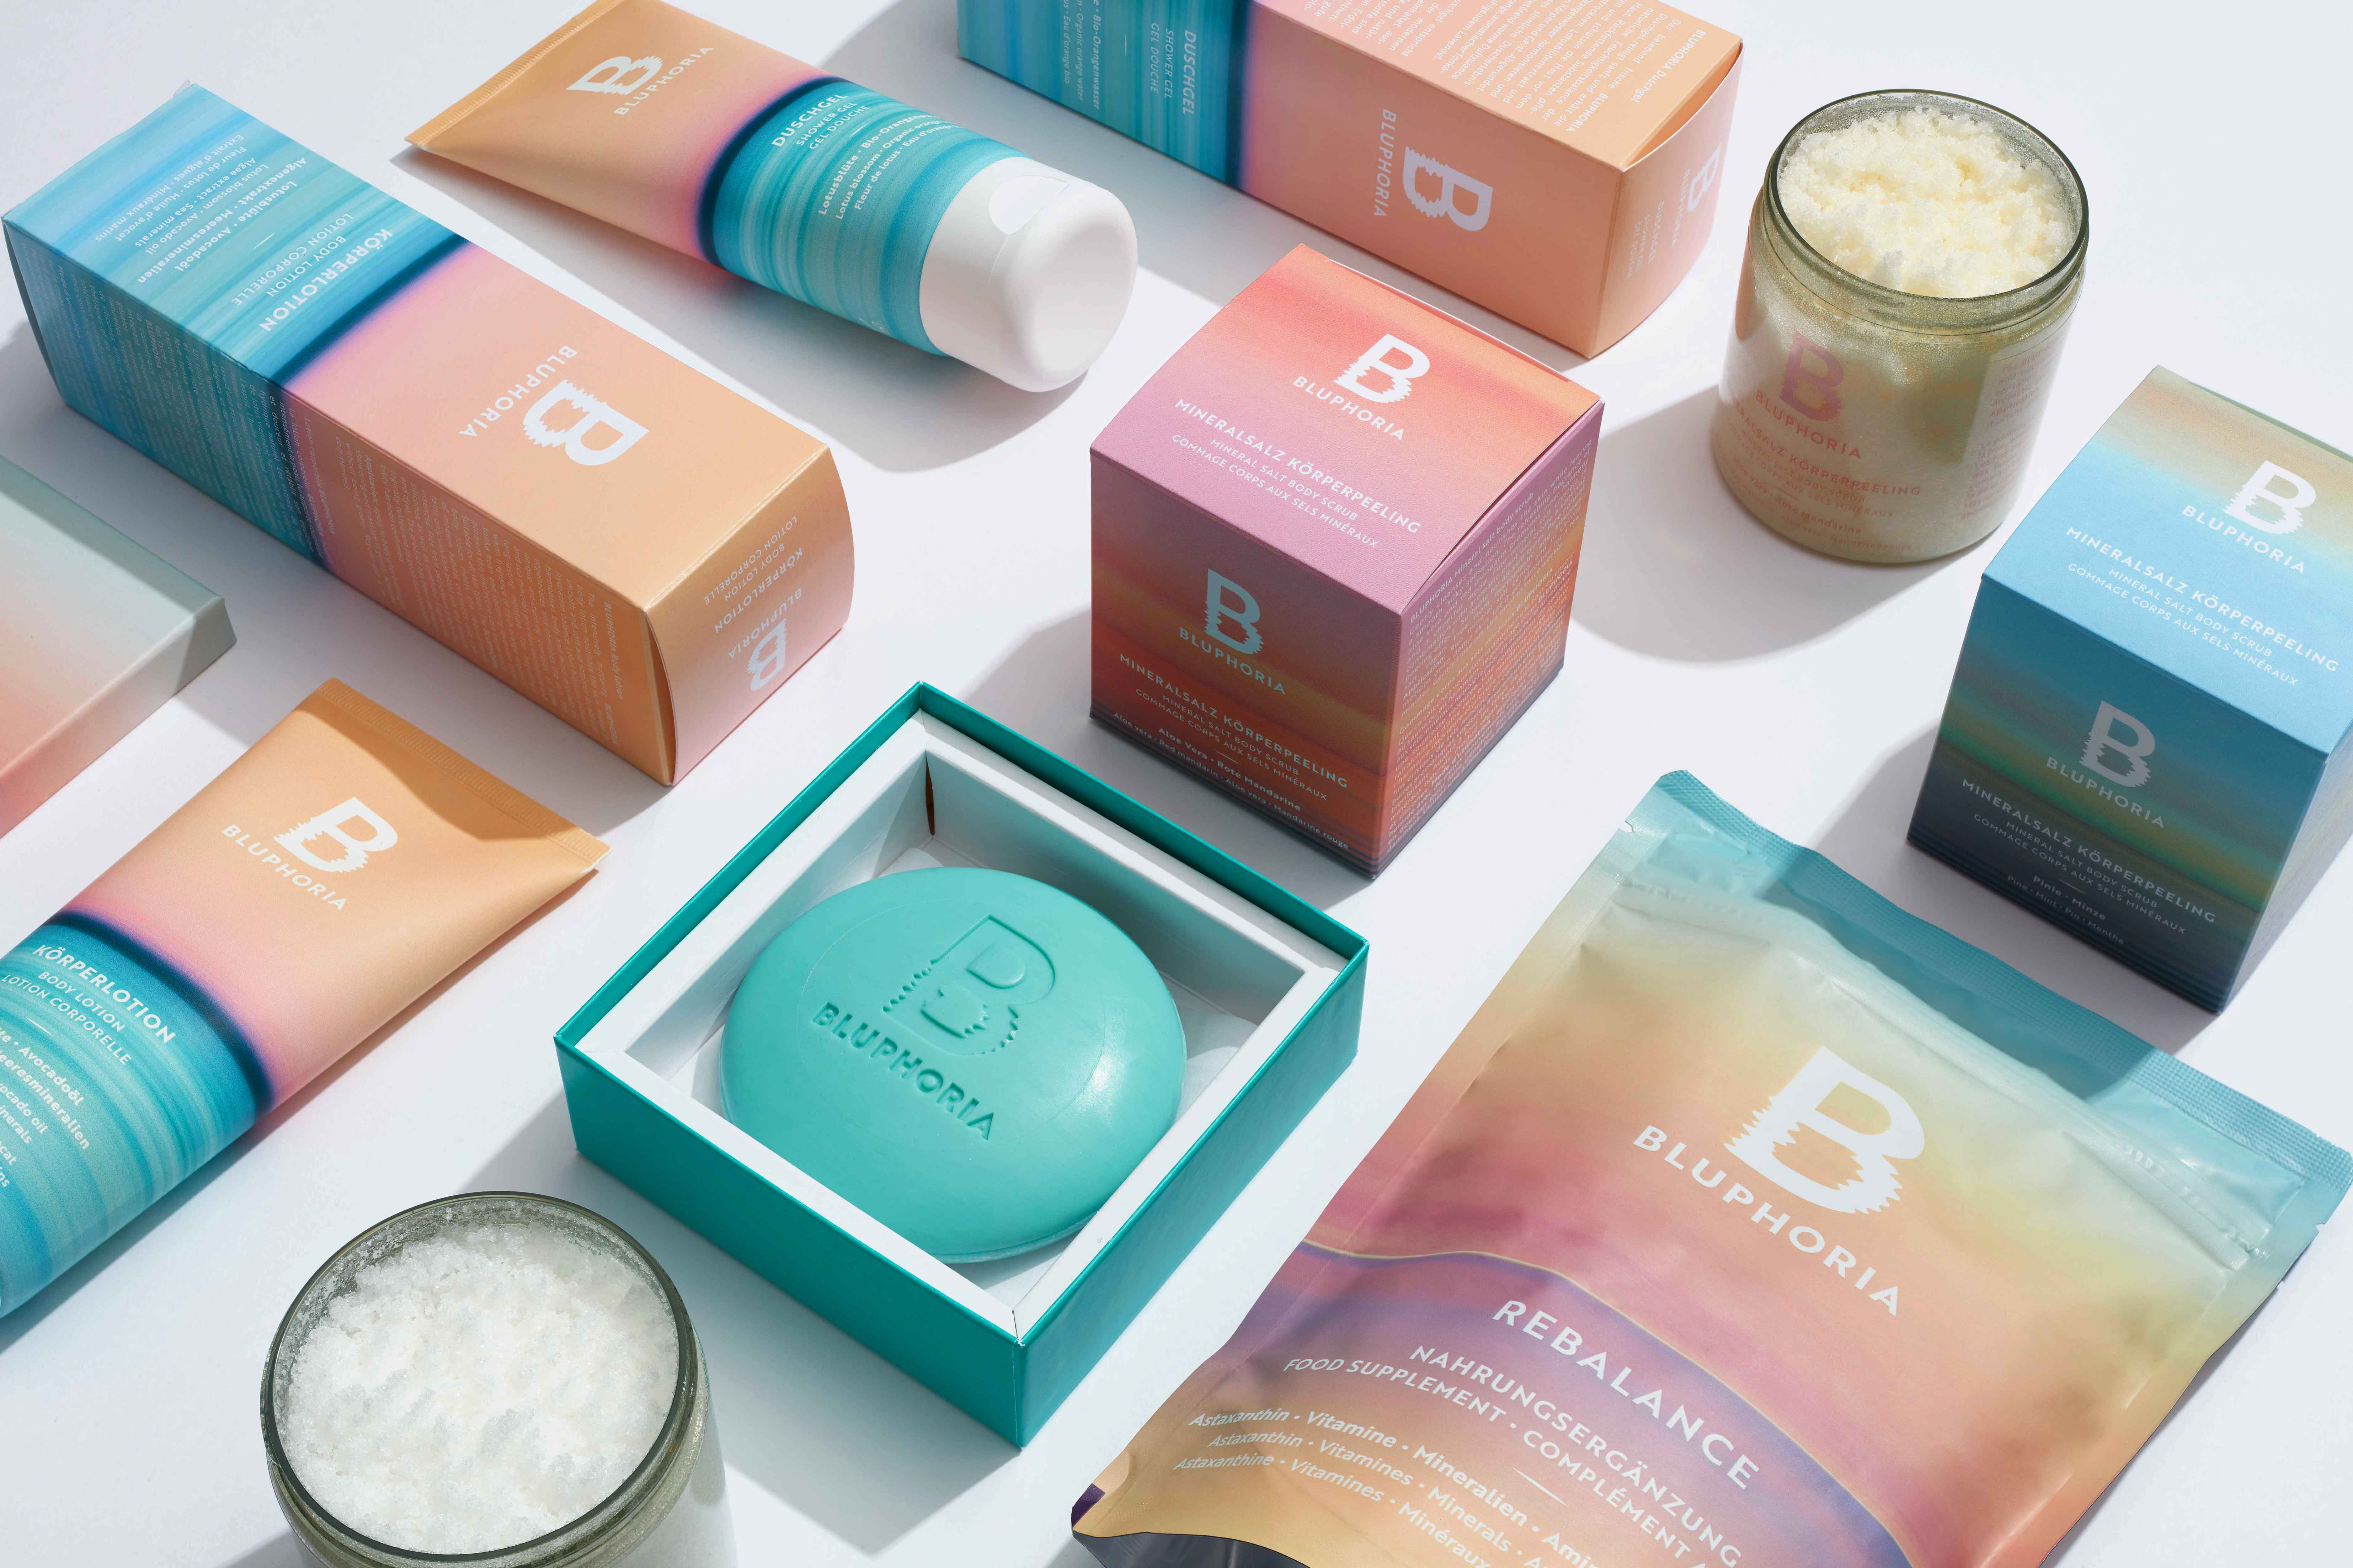 Cattle Brands Studio Creates Bluphoria – A New Wellbeing Brand Reimagining Spa Culture Today and Into The Future